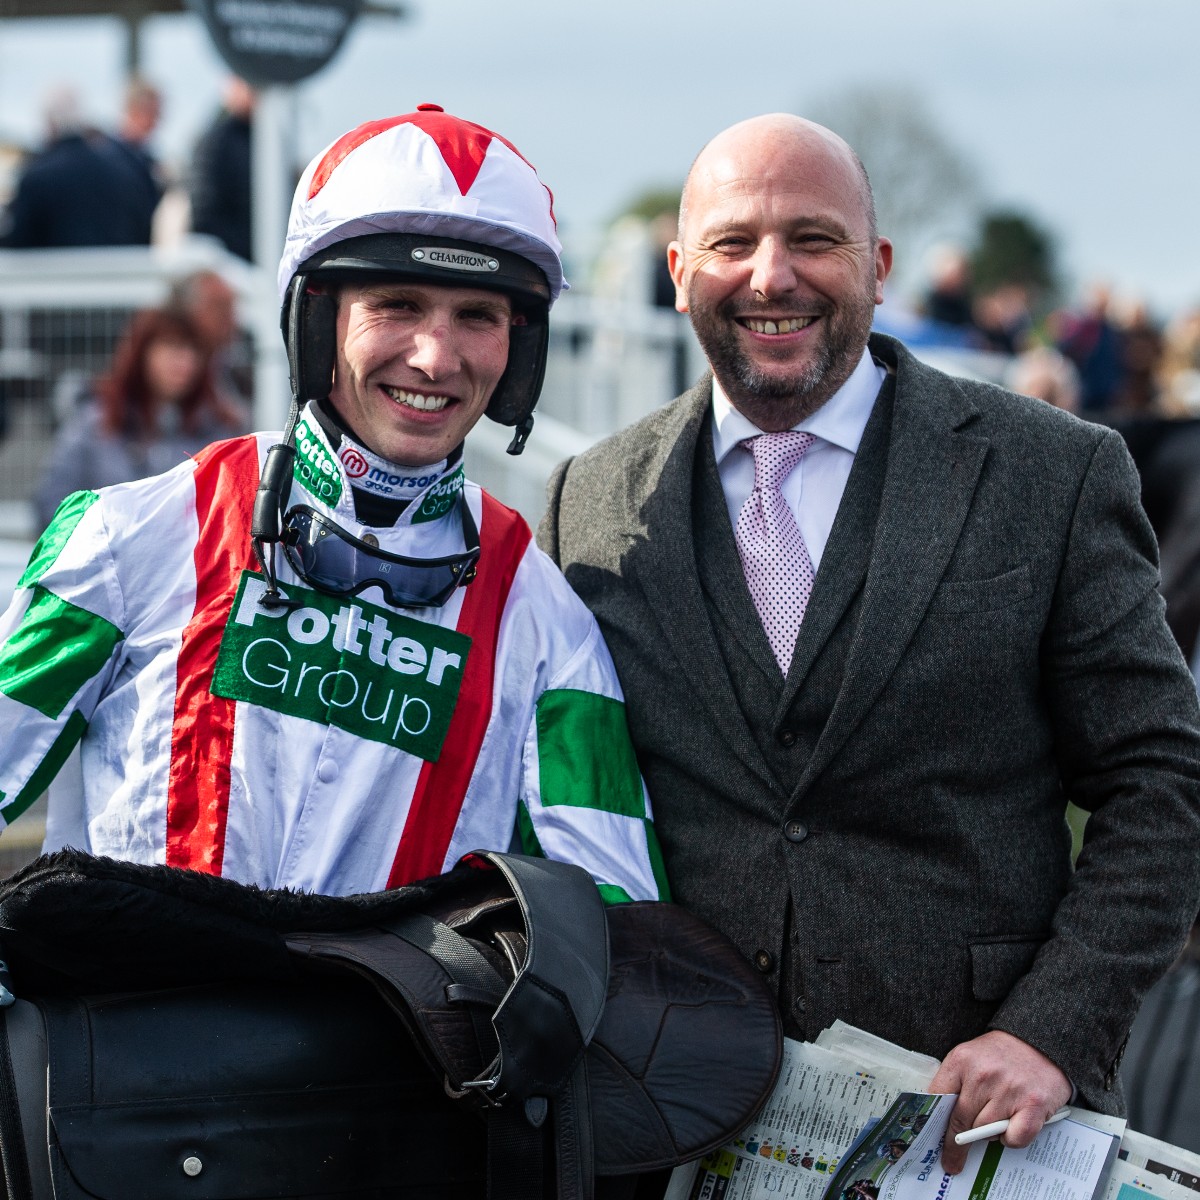 Track Talk! We reflect on what has been an incredible Jump Jockey's Championship, with Harry Cobden sealing his victory here at Chepstow on Friday night! Read the story: brnw.ch/21wJhWD